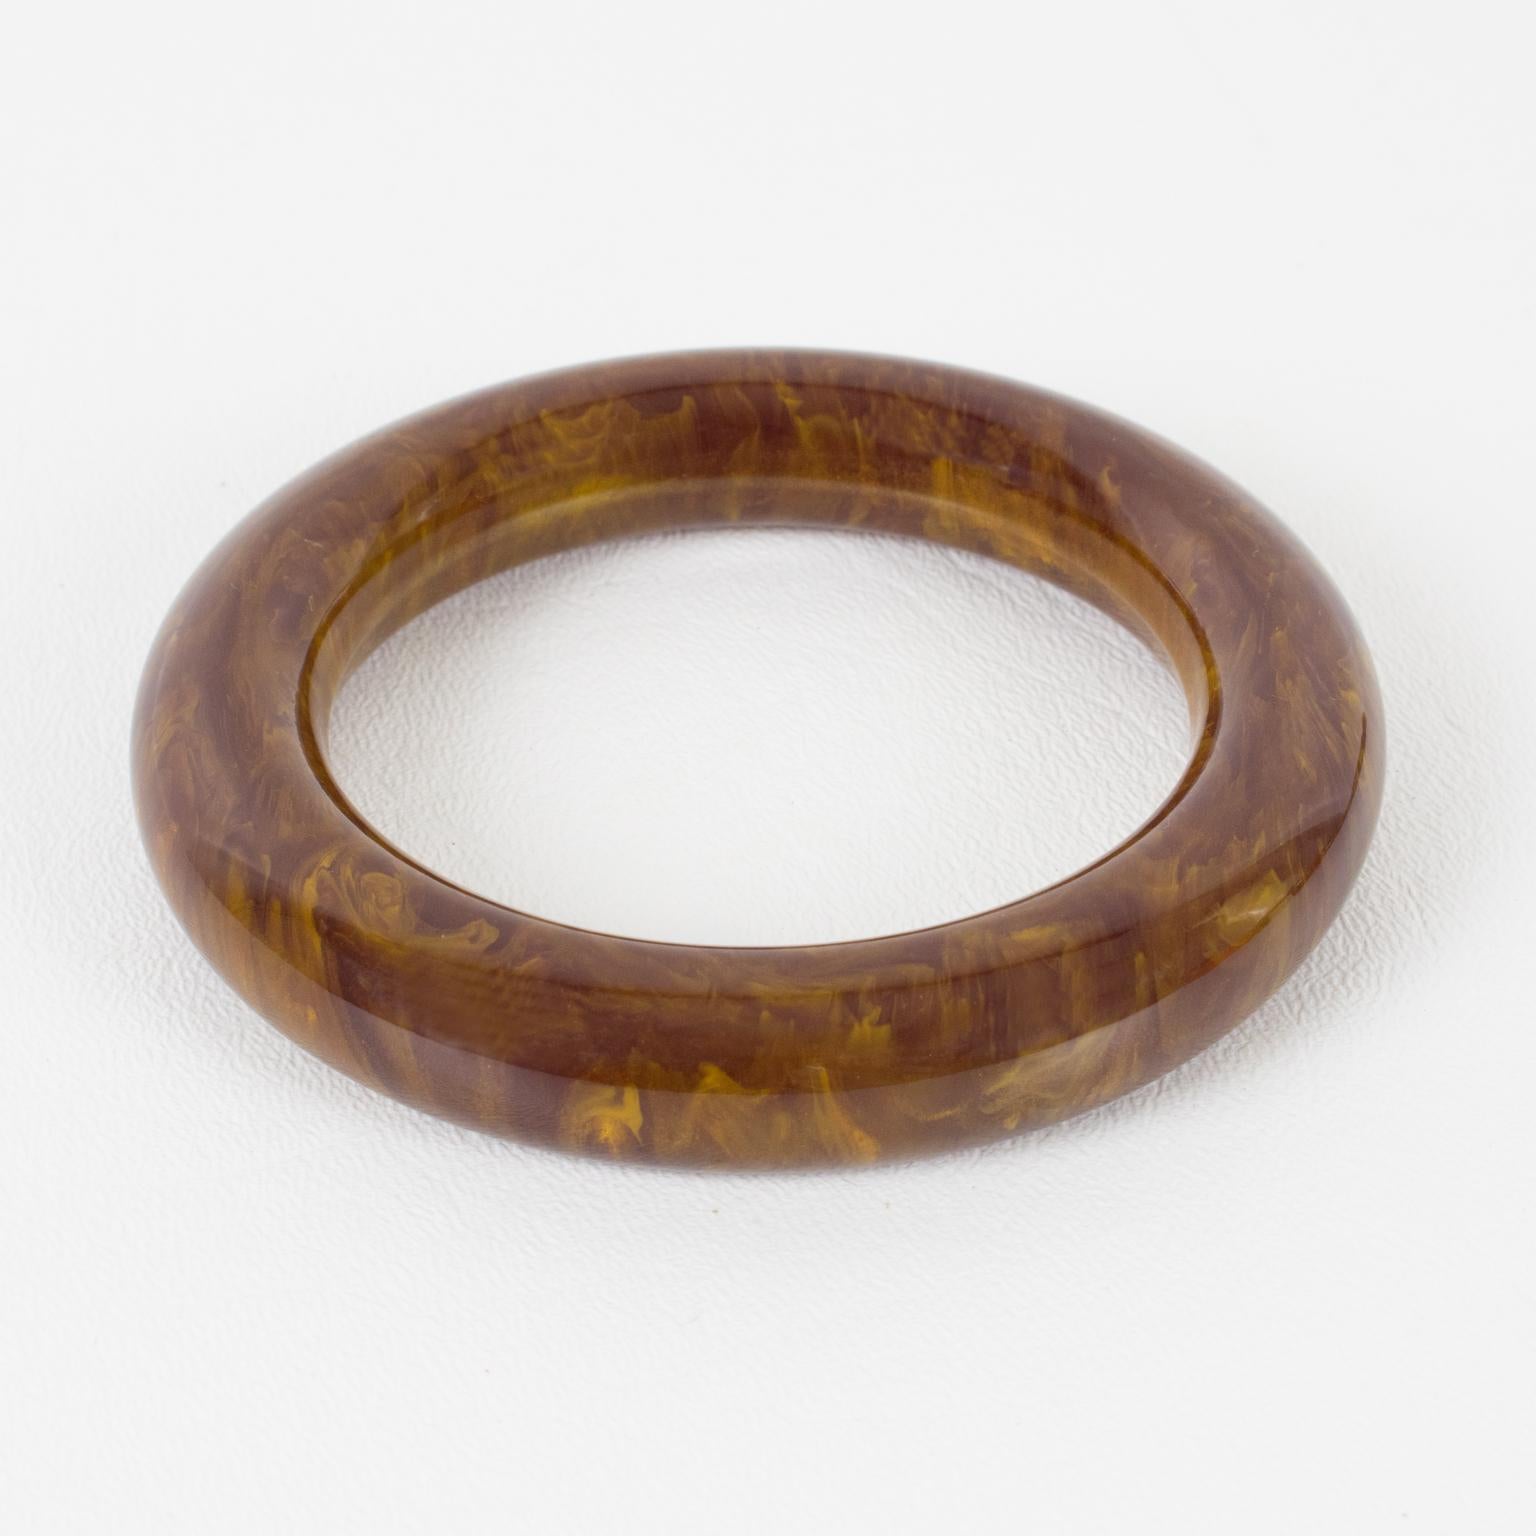 Lovely purple stardust marble Bakelite bracelet bangle. Chunky tube shape with intense purple marble tone with cloudy white swirling and gold flakes inclusions. 
Measurements: Inside across is 2.50 in. diameter (6.4 cm) - outside across is 3.57 in.